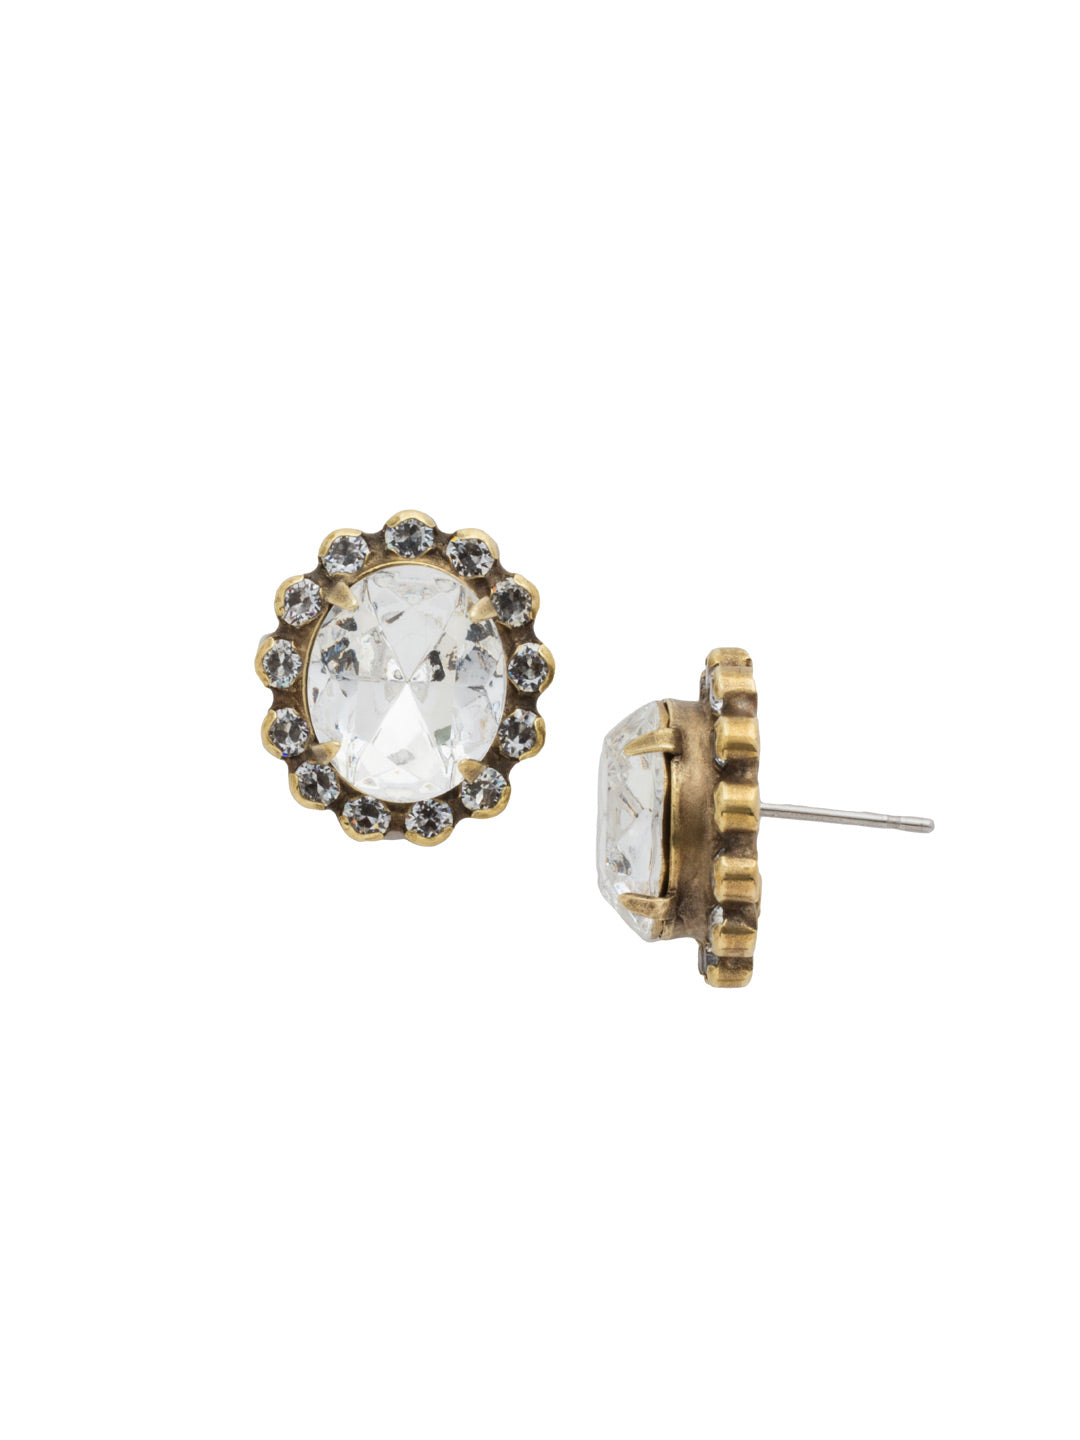 Graycen Round Stud Earring - ECY5AGCRY - <p>The Graycen Round Stud Earrings feature a round halo cut crystal on a post. From Sorrelli's Crystal collection in our Antique Gold-tone finish.</p>